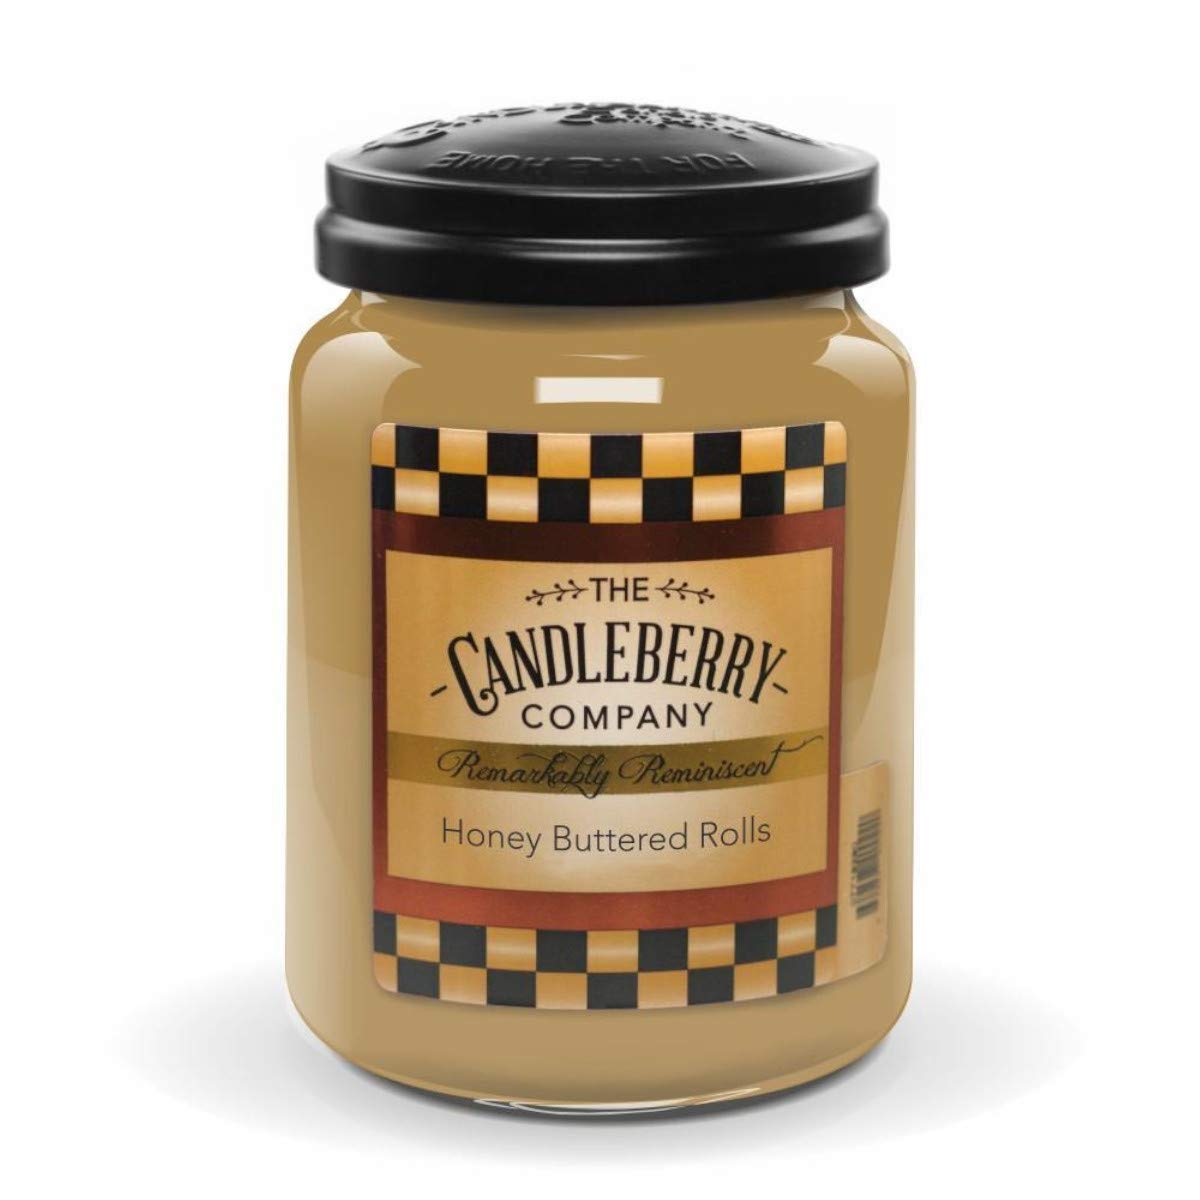 Candleberry Candles | Honey Buttered Rolls Candle | Best Candles on The Market | Hand Poured in The USA | Highly Scented & Long Lasting | Large Jar 26 oz